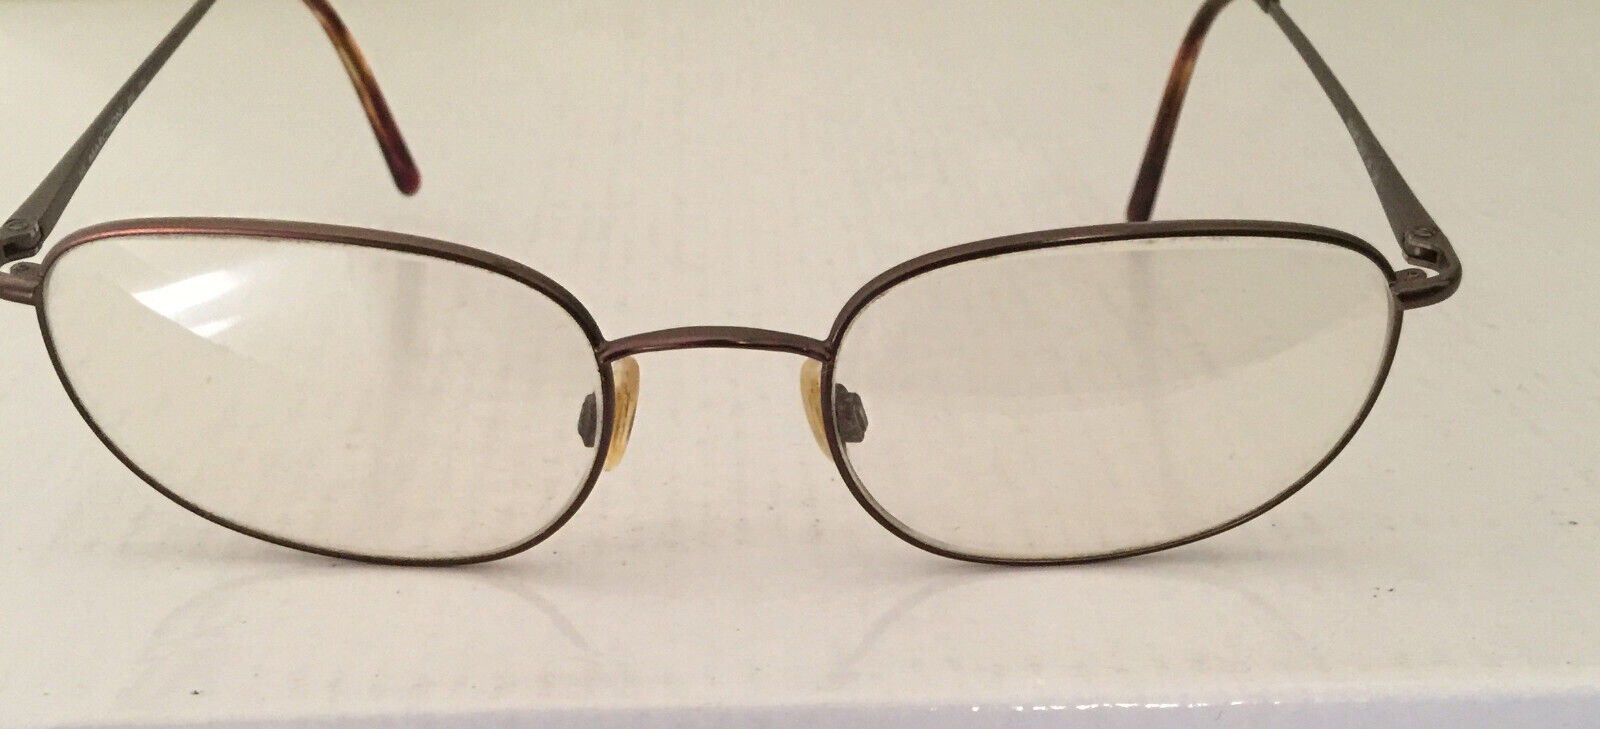 VTG Marchon Eyeglass Frames brown metal size 55[]21 145  Made In Italy